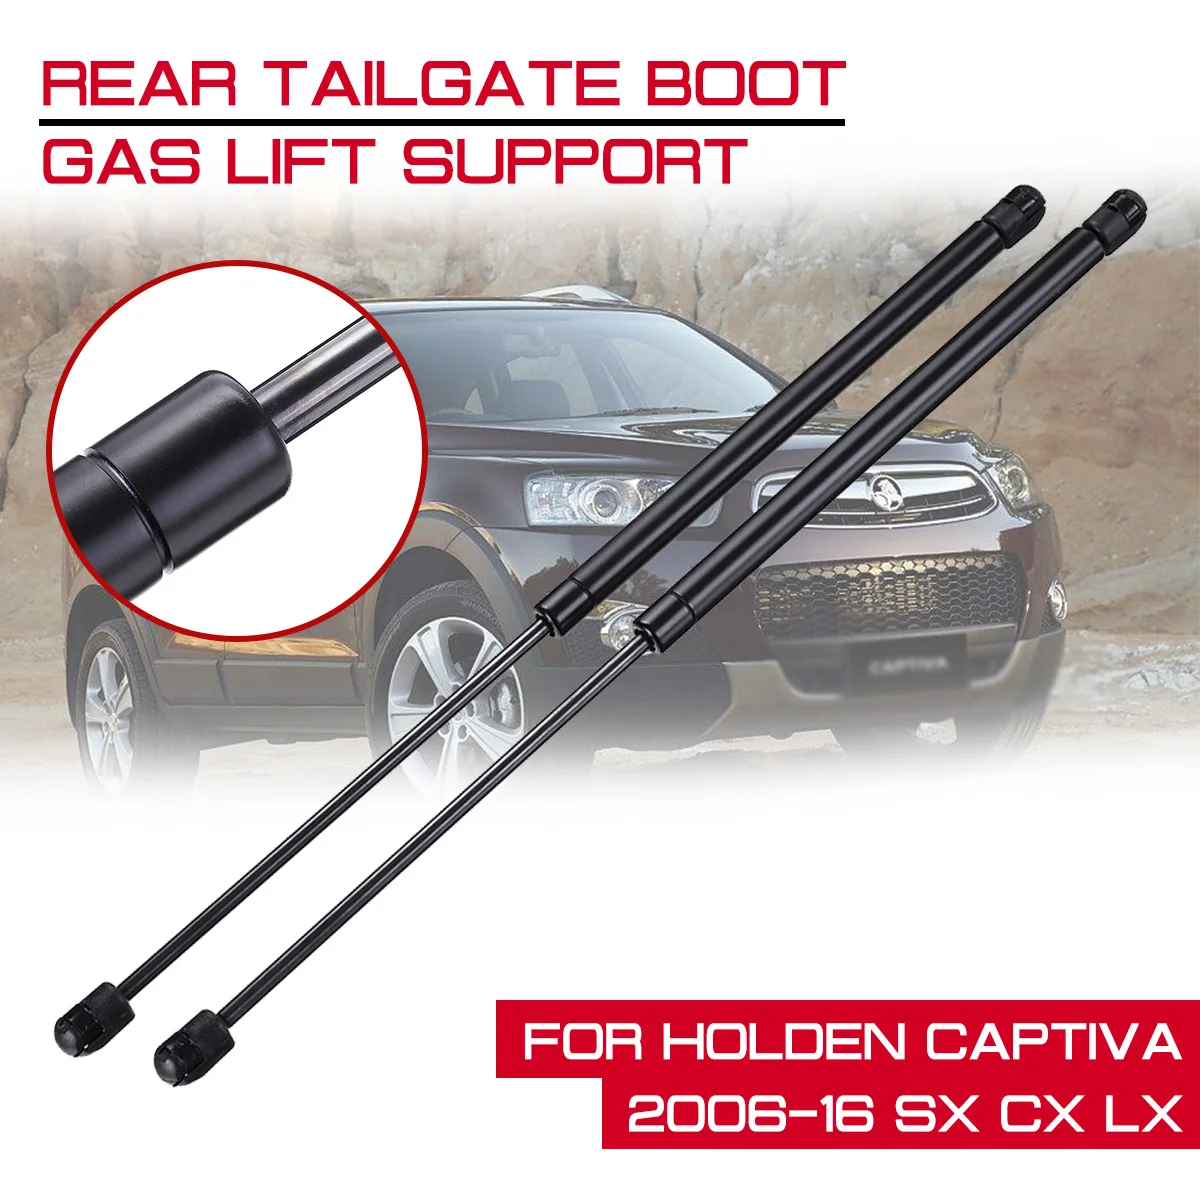 

Strut Spring Bars Hydraulic Rod Shock Bracket Carbon Steel Rear Trunk Support For Holden Captiva 2006 to 2016 SX CX LX